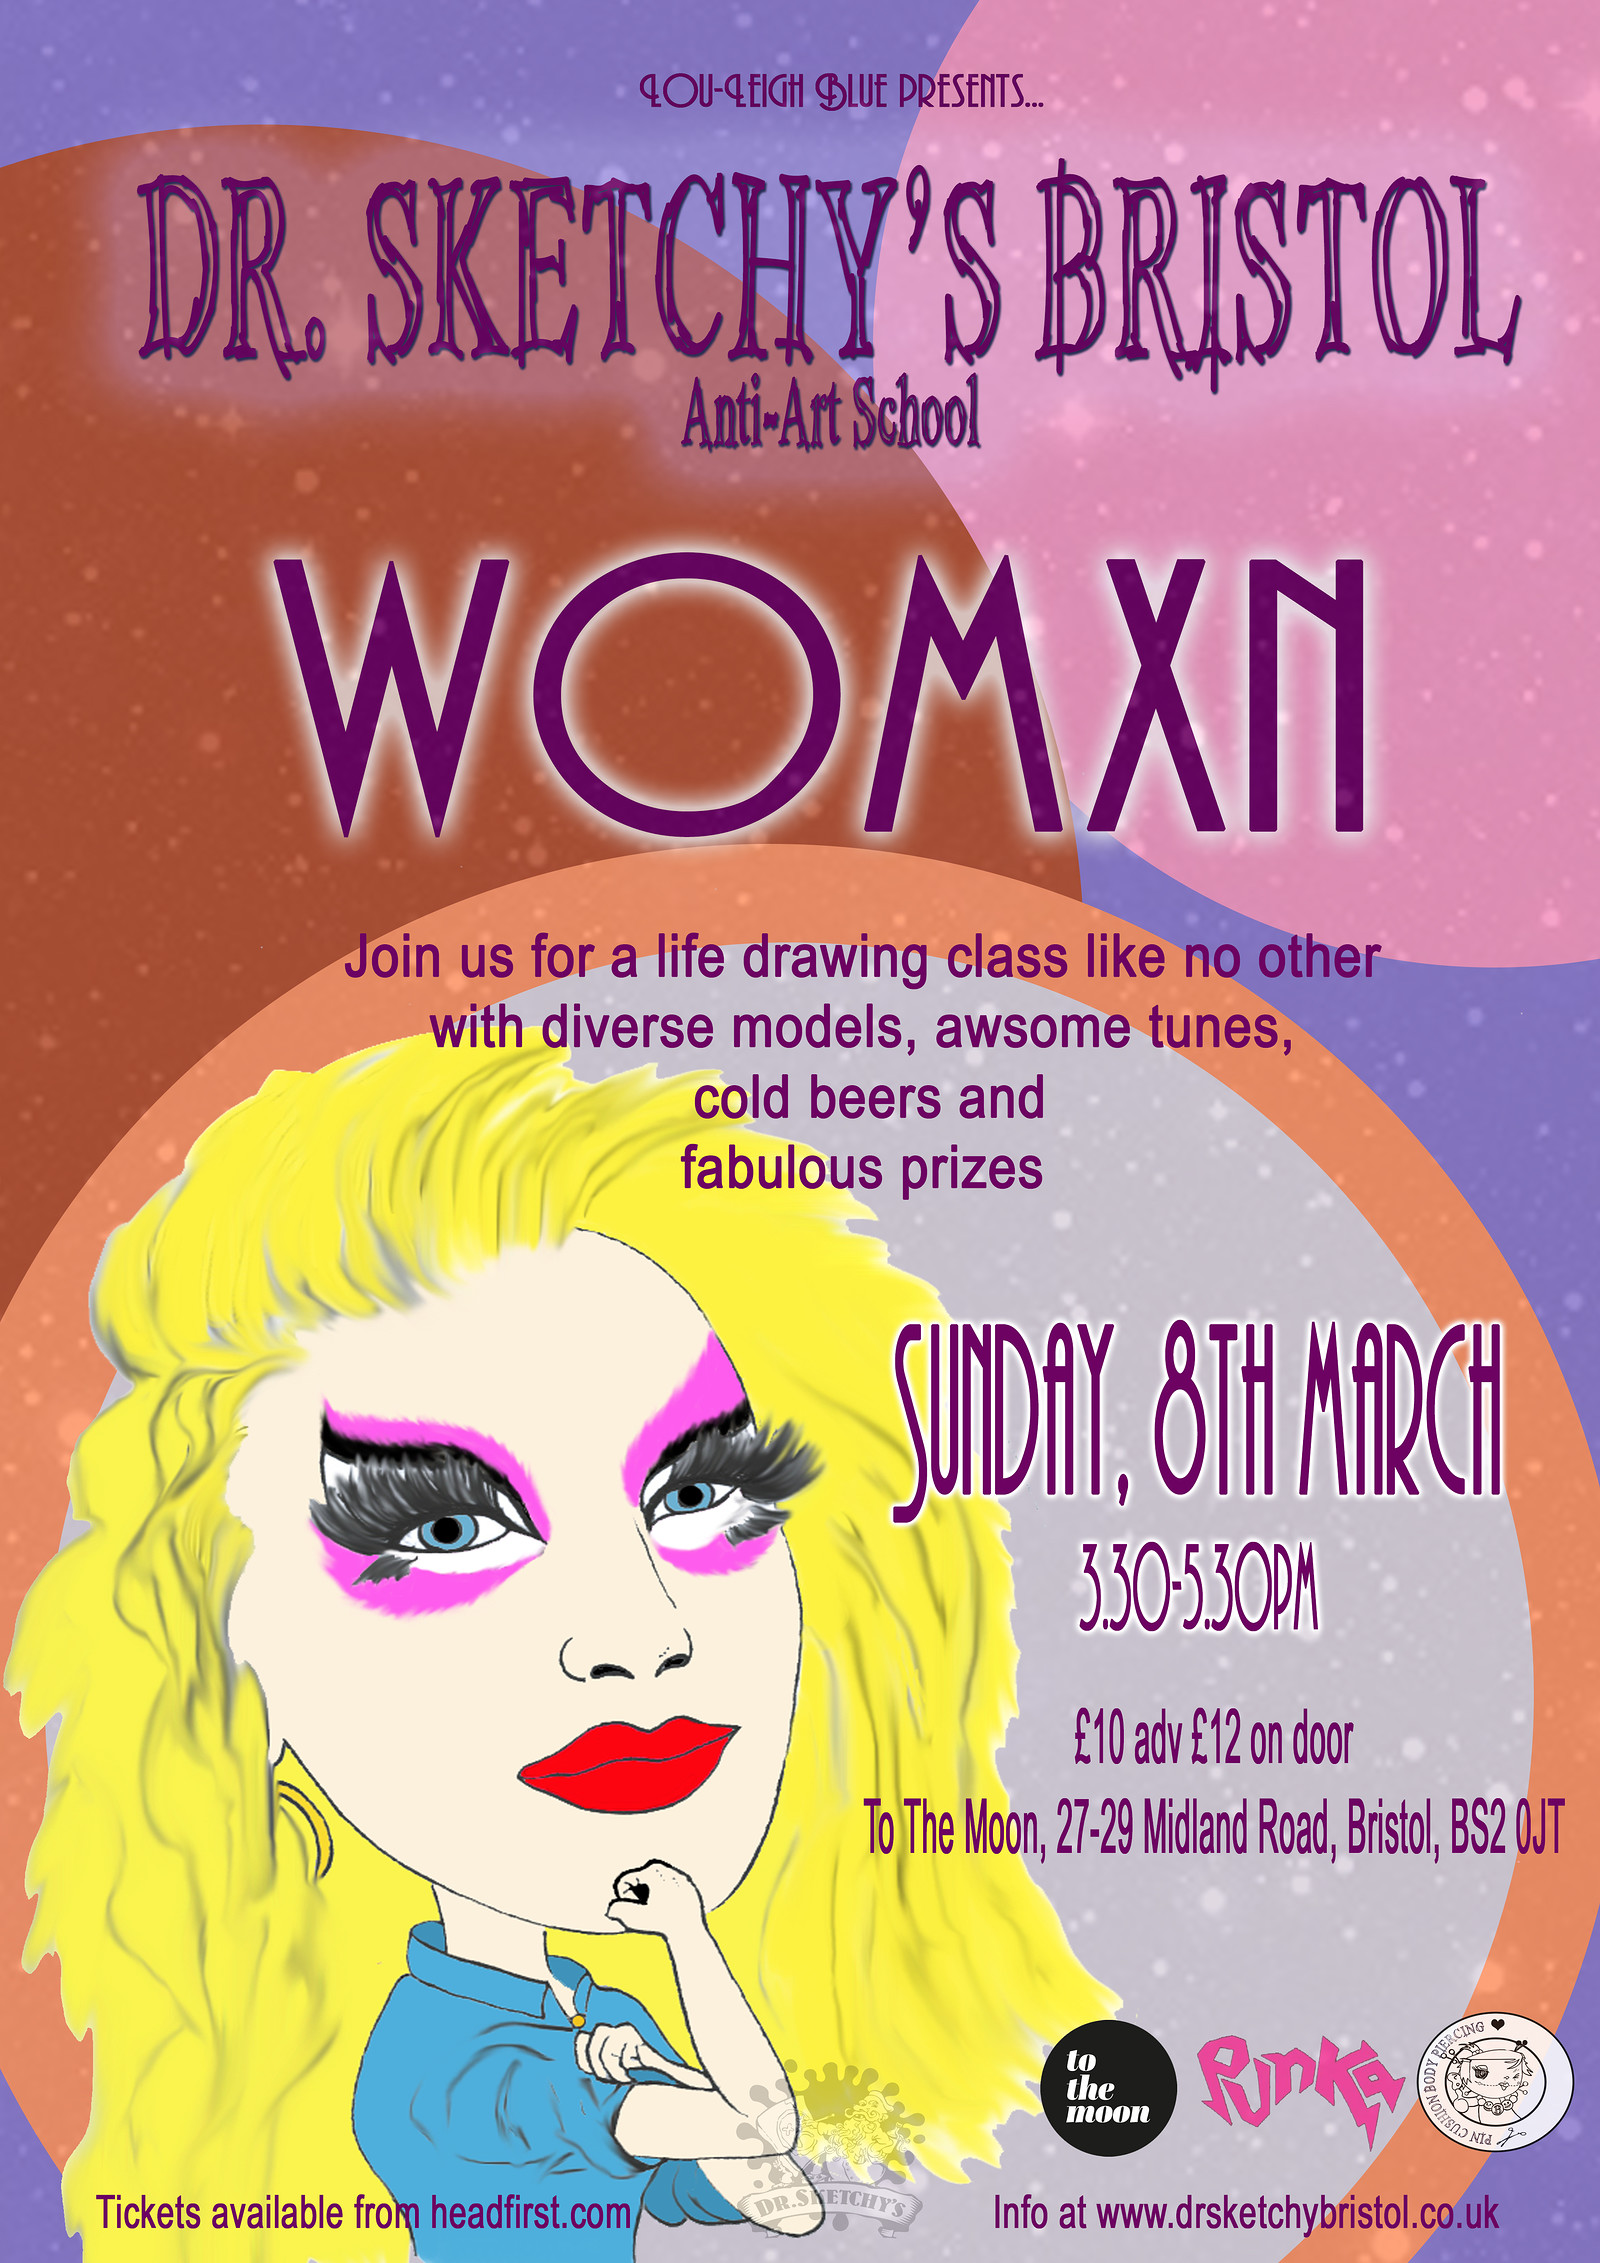 Dr. Sketchy's presents Womxn at To The Moon 27-29 Midland Road, BS2 0JT Bristol